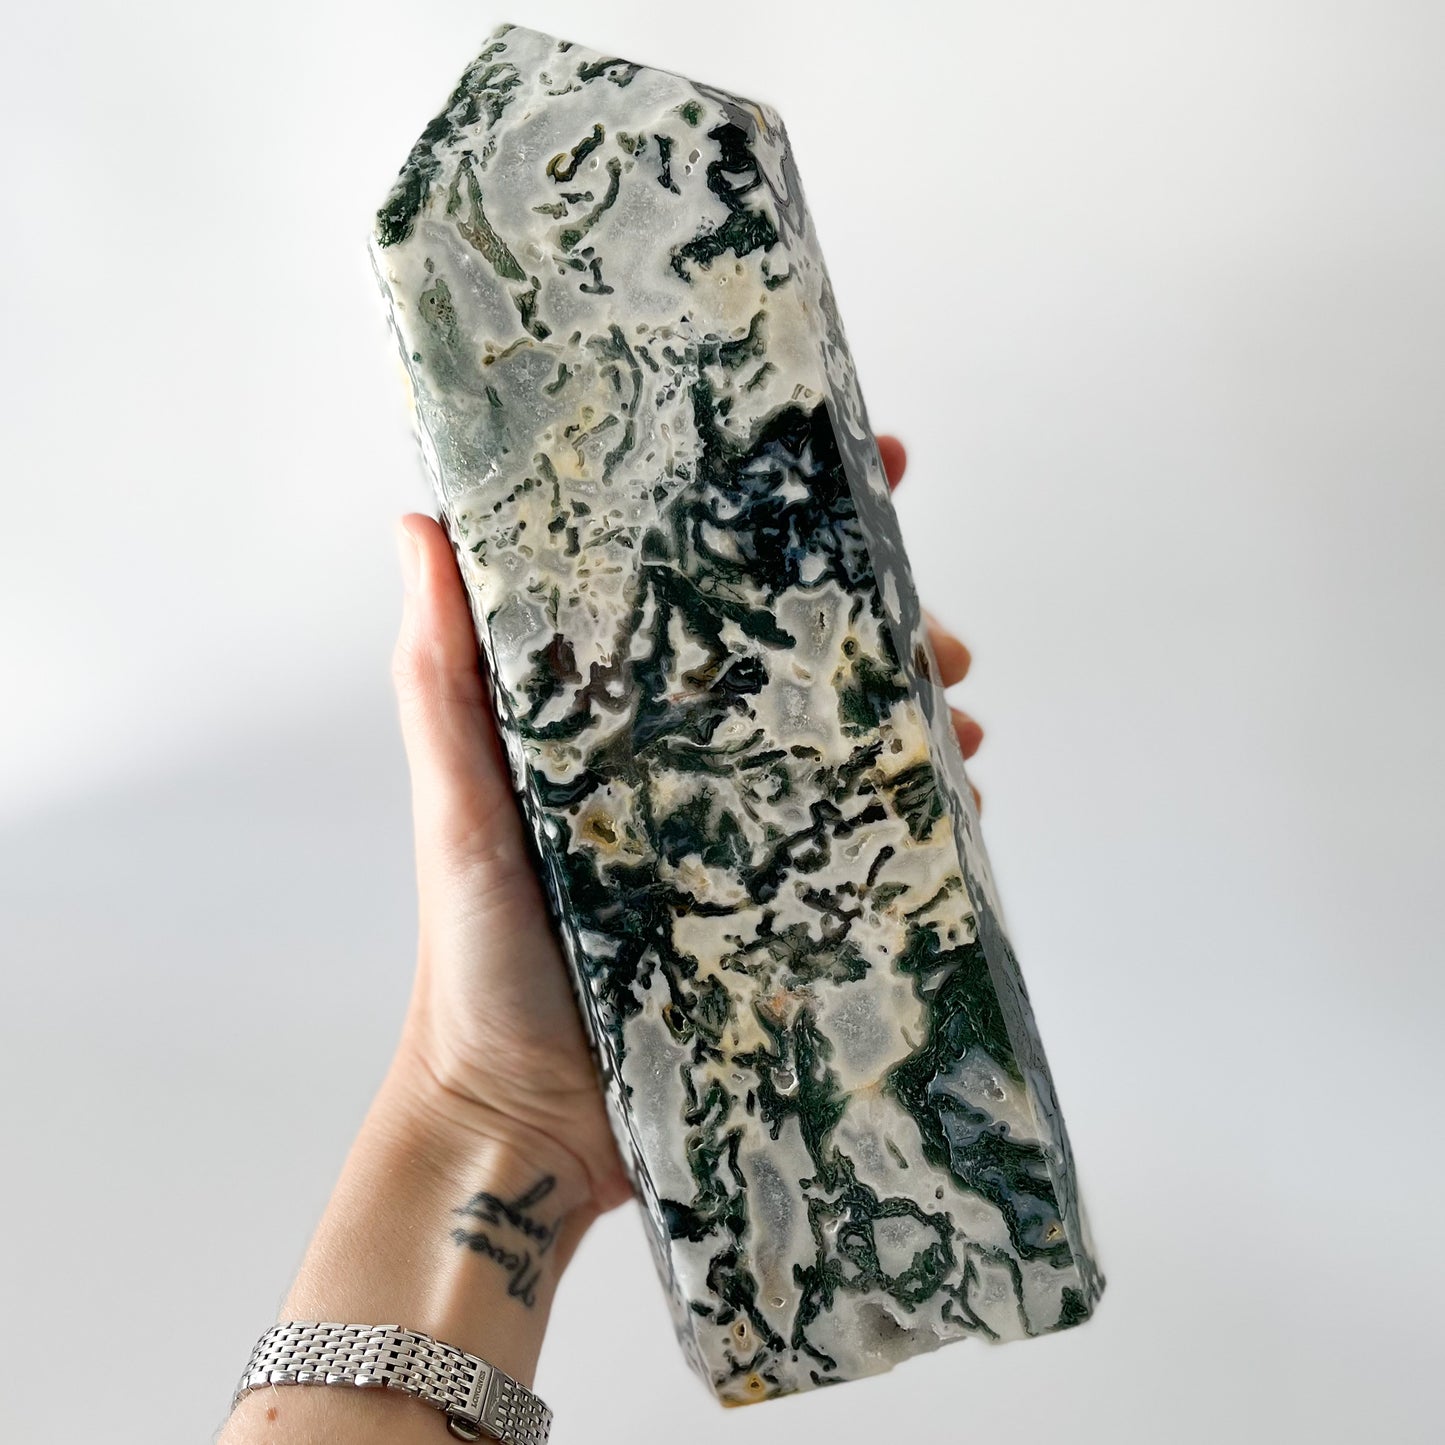 Moss Agate Tower / 2.061kg